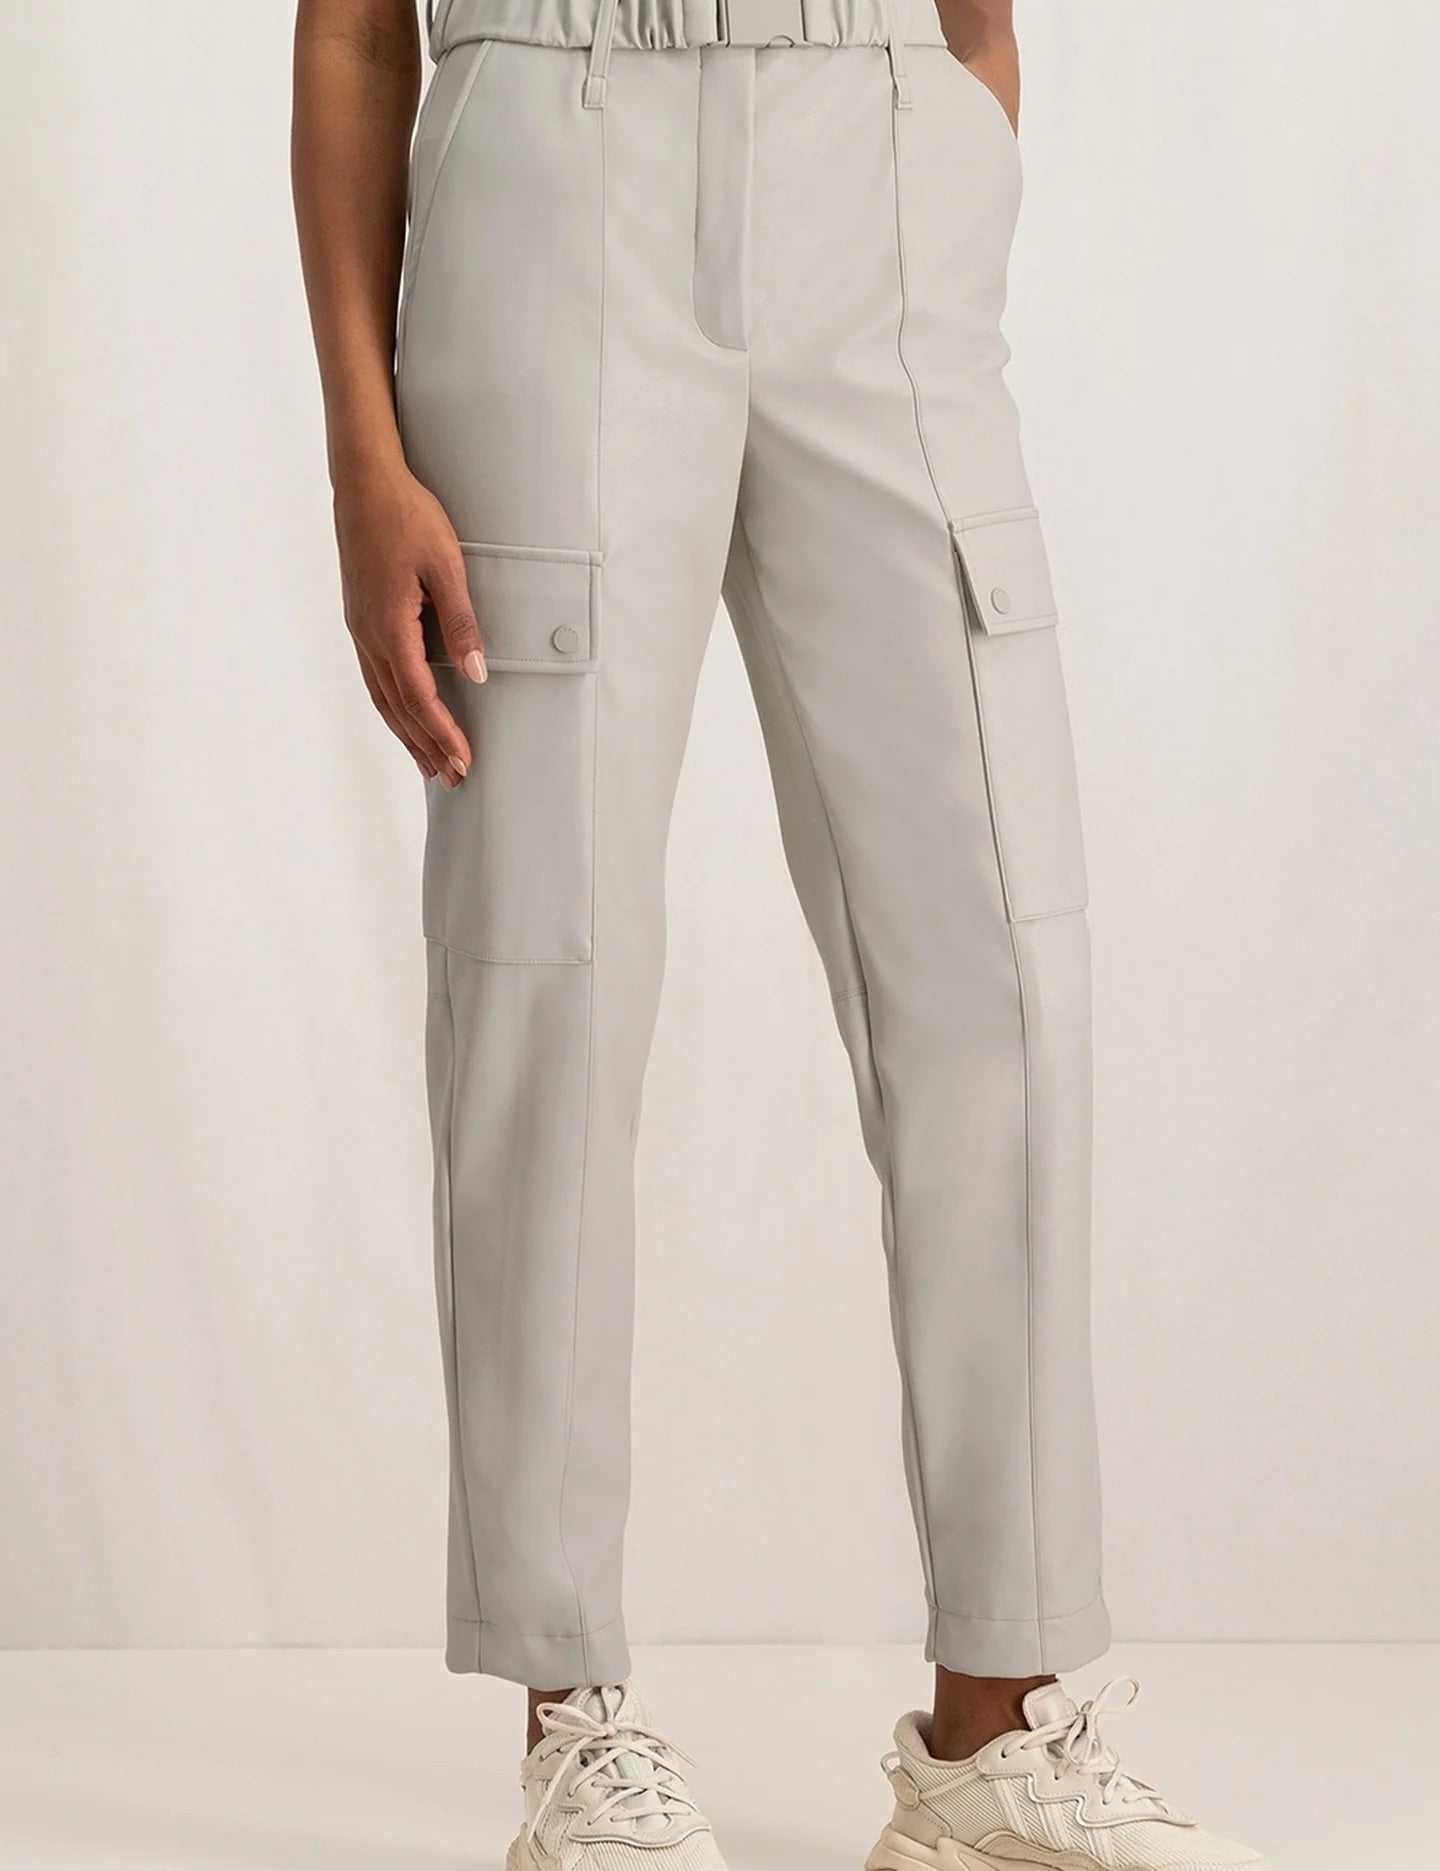 cargo-trousers-with-straight-legs-and-belt-in-faux-leather-silver-lining-beige_be898bca-cf08-4dc1-b78c-fc0b6cc9a80a_2880x_jpg.jpg